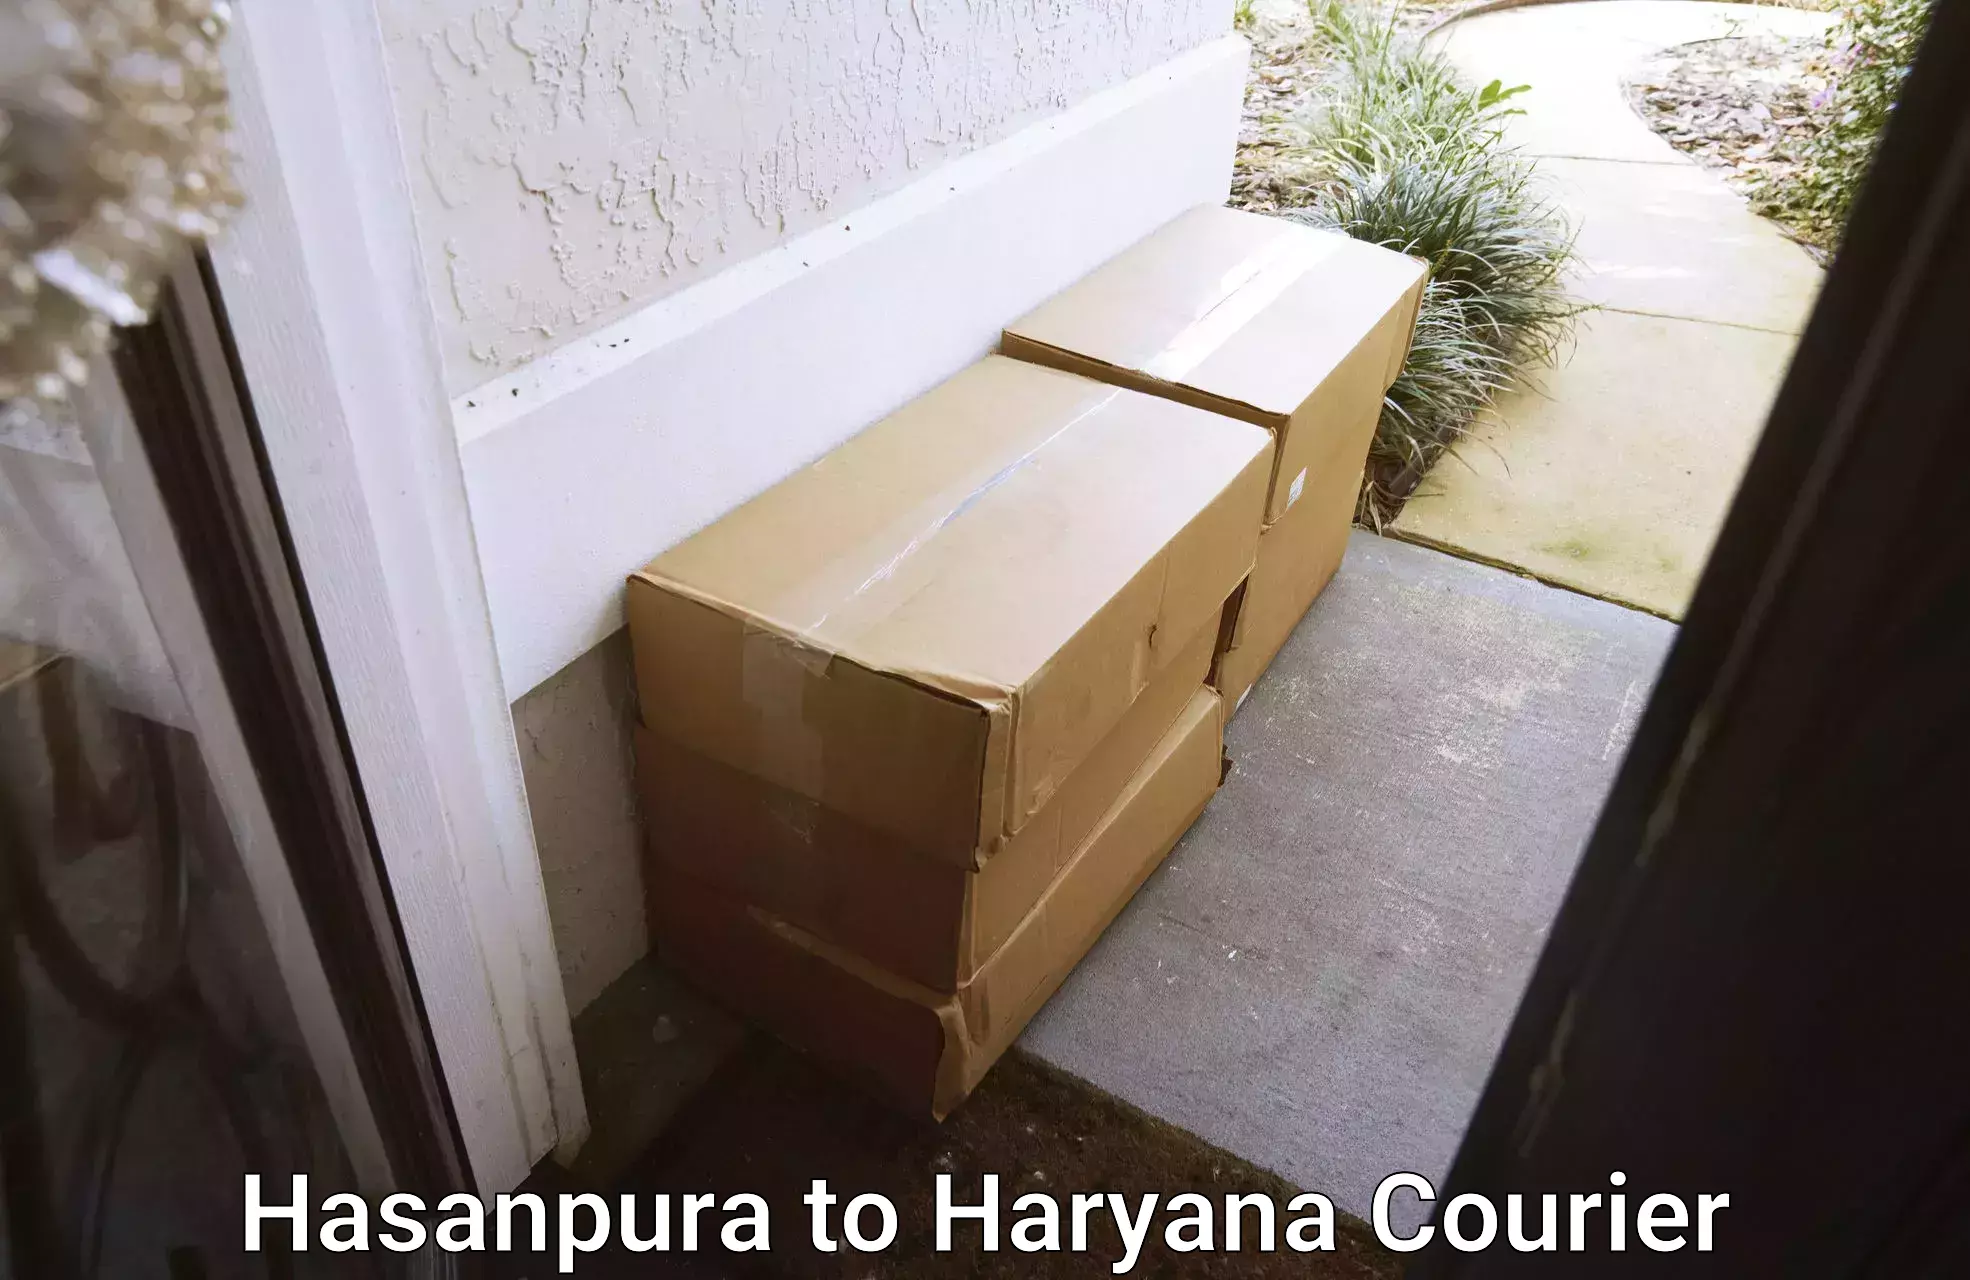 Full-service movers Hasanpura to Sonipat